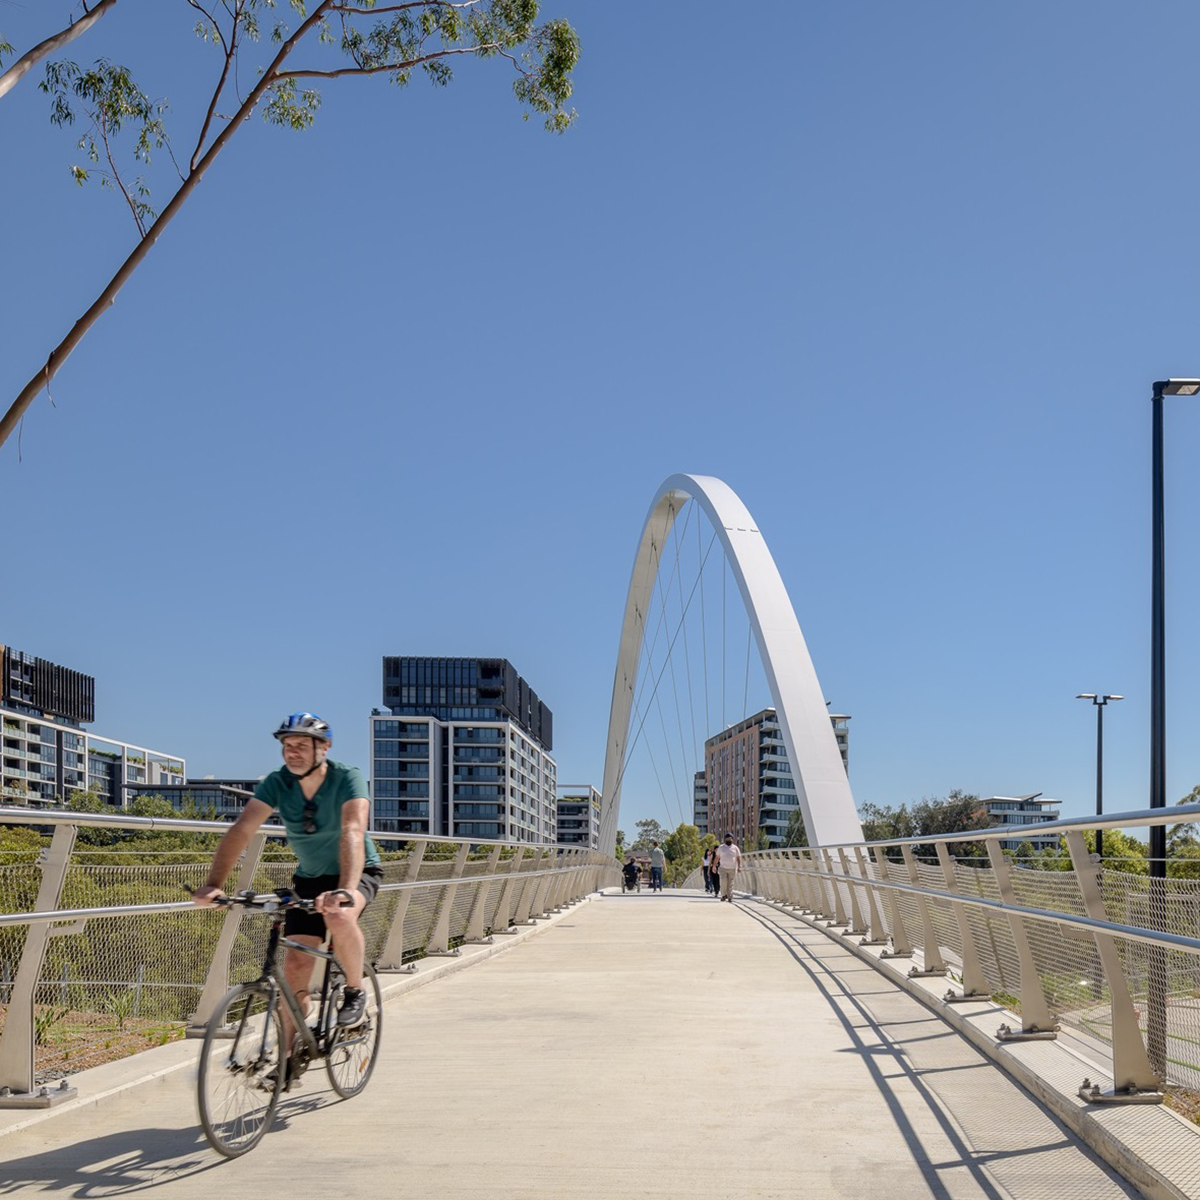 Alfred Street Bridge is now open! Get ready for adventure as you explore the brand-new Alfred Street Bridge. Spanning the picturesque Parramatta River between James Ruse Drive and Gasworks Bridge.